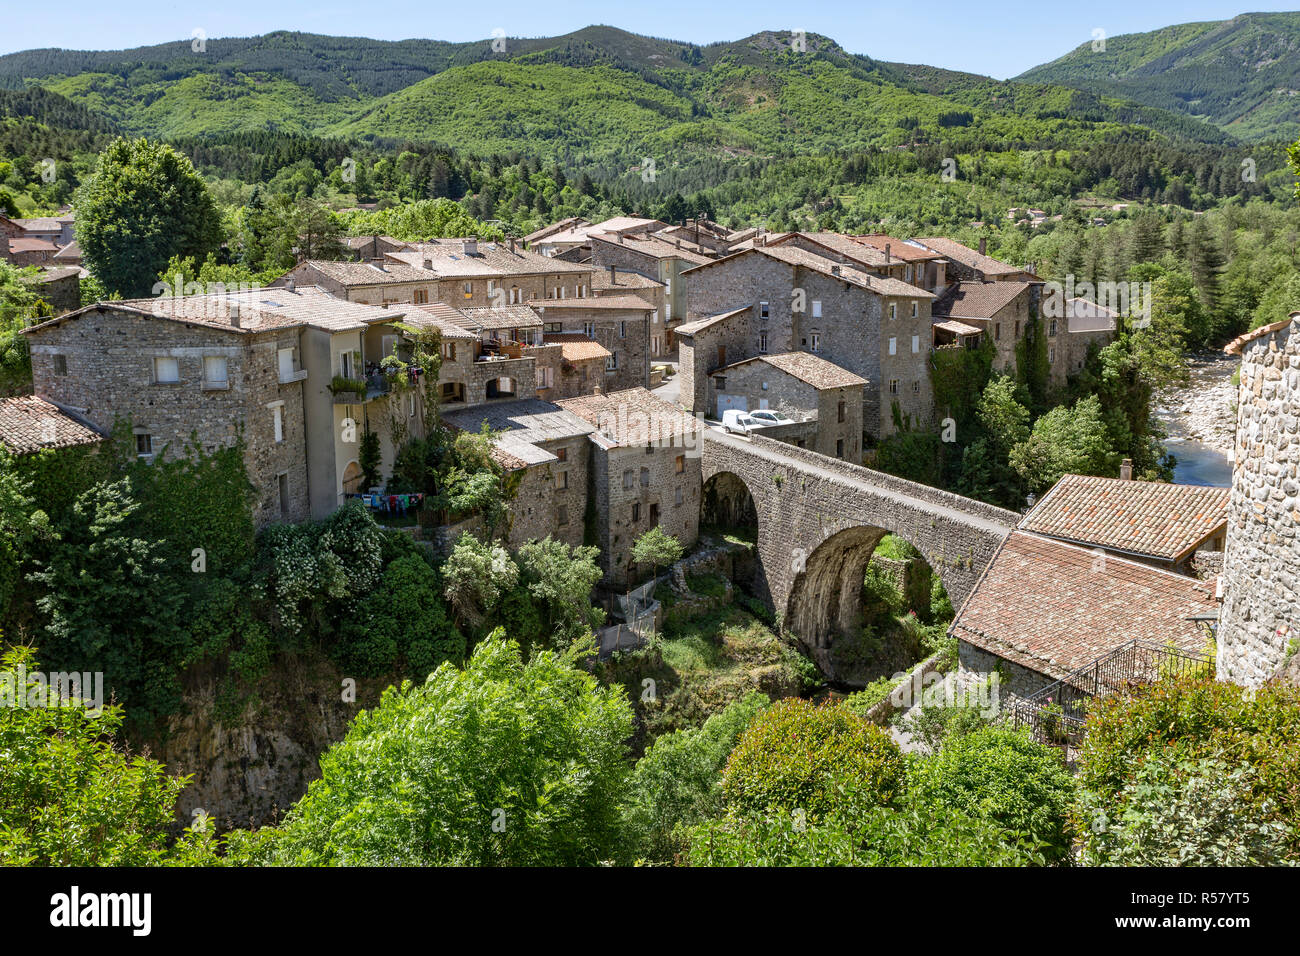 the town of jaujac in the ardeche,southern france Stock Photo